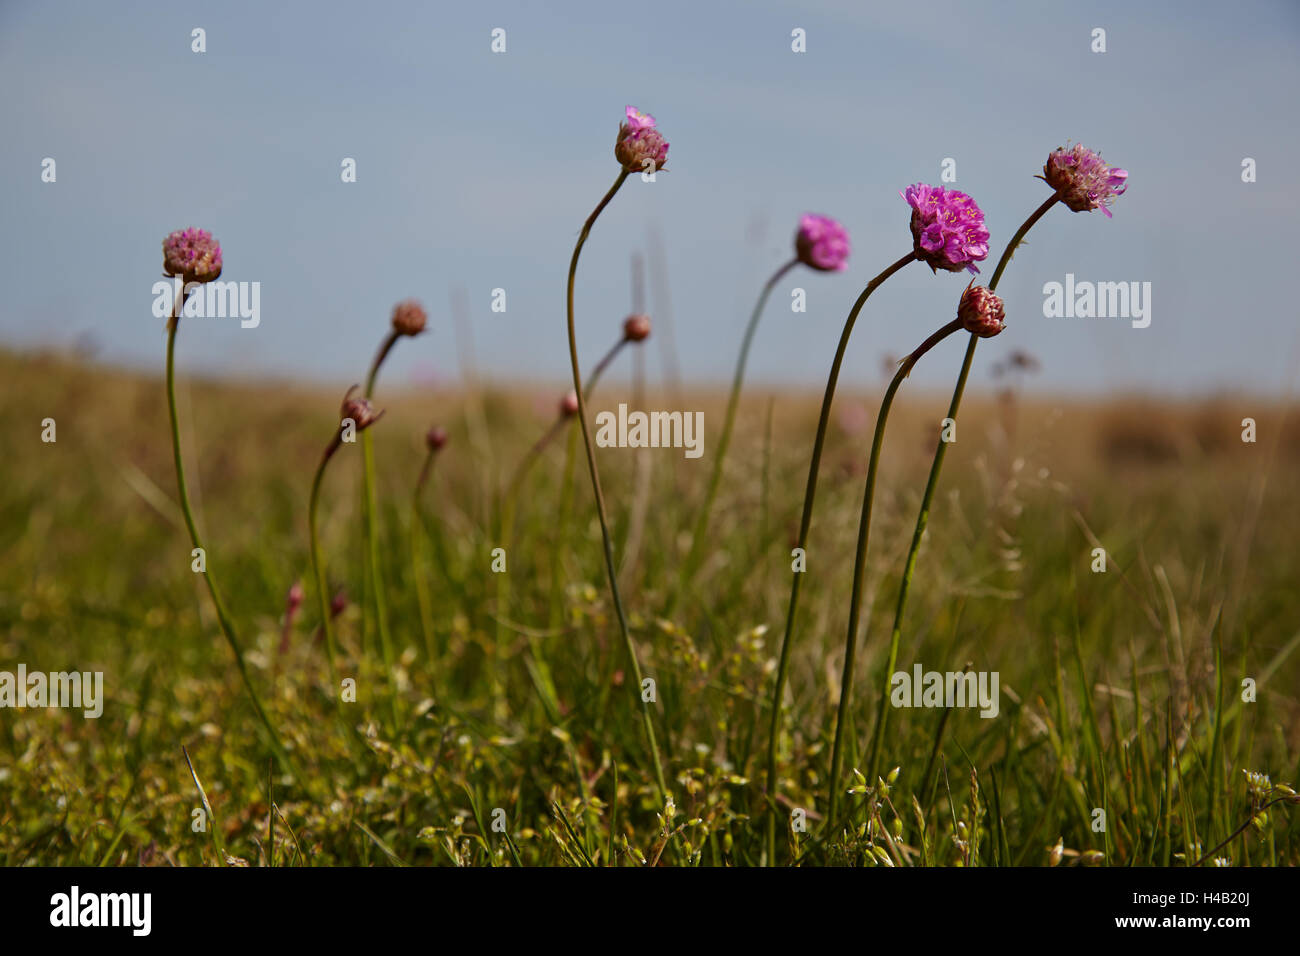 Thrift, Armeria maritima, also known as sea thrift, on the salt meadows of the island Hiddensee Stock Photo